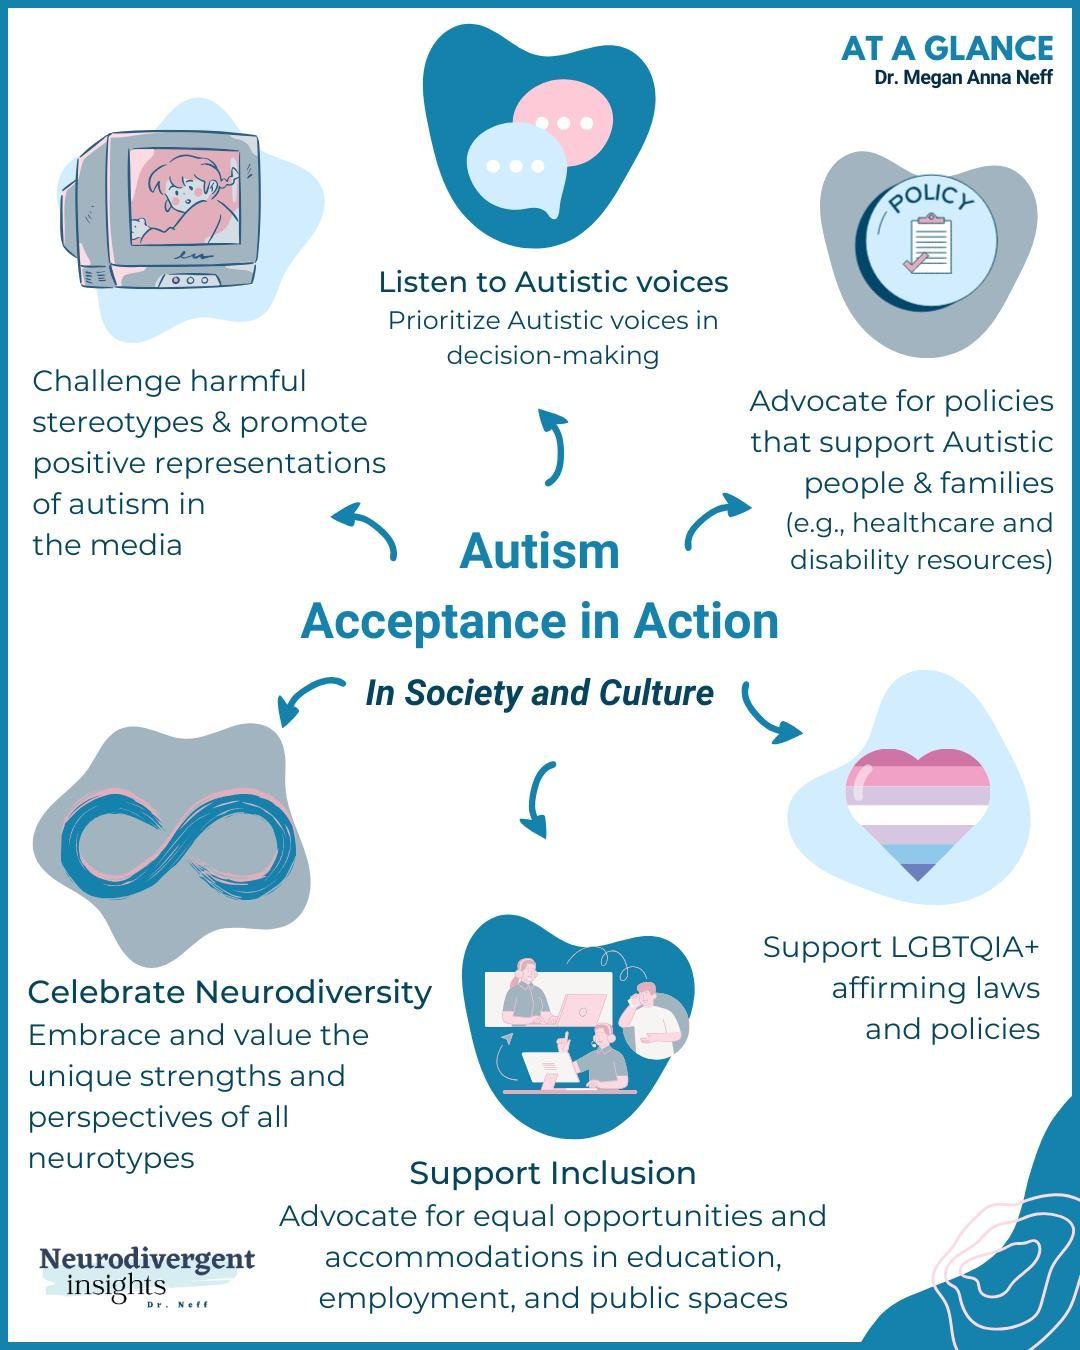 #ConcreteAcceptance: Day 7 of 7 - Autism Inclusion in Society and Culture&quot;⁠
⁠
Today, we conclude our series by looking at how society and culture can evolve to be more inclusive of Autistic people. Today's focus is on broad, societal actions. ⁠
